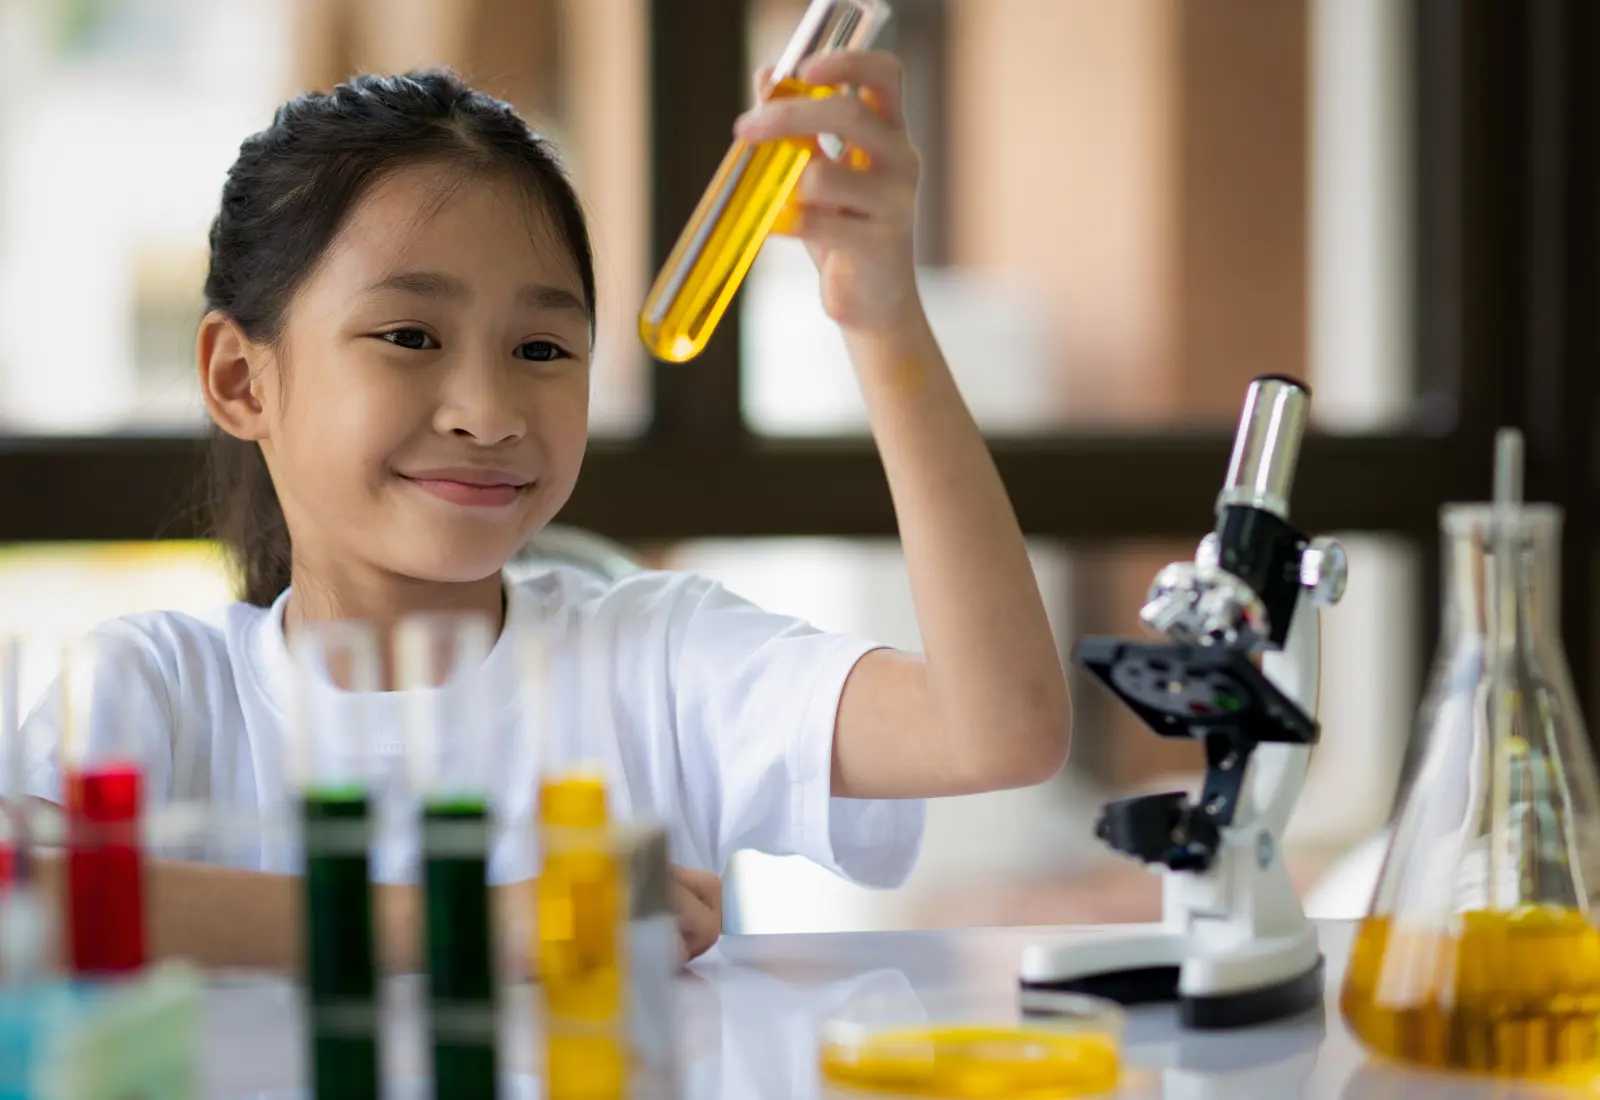 How I Got My 5-Year-Old Hooked On Science